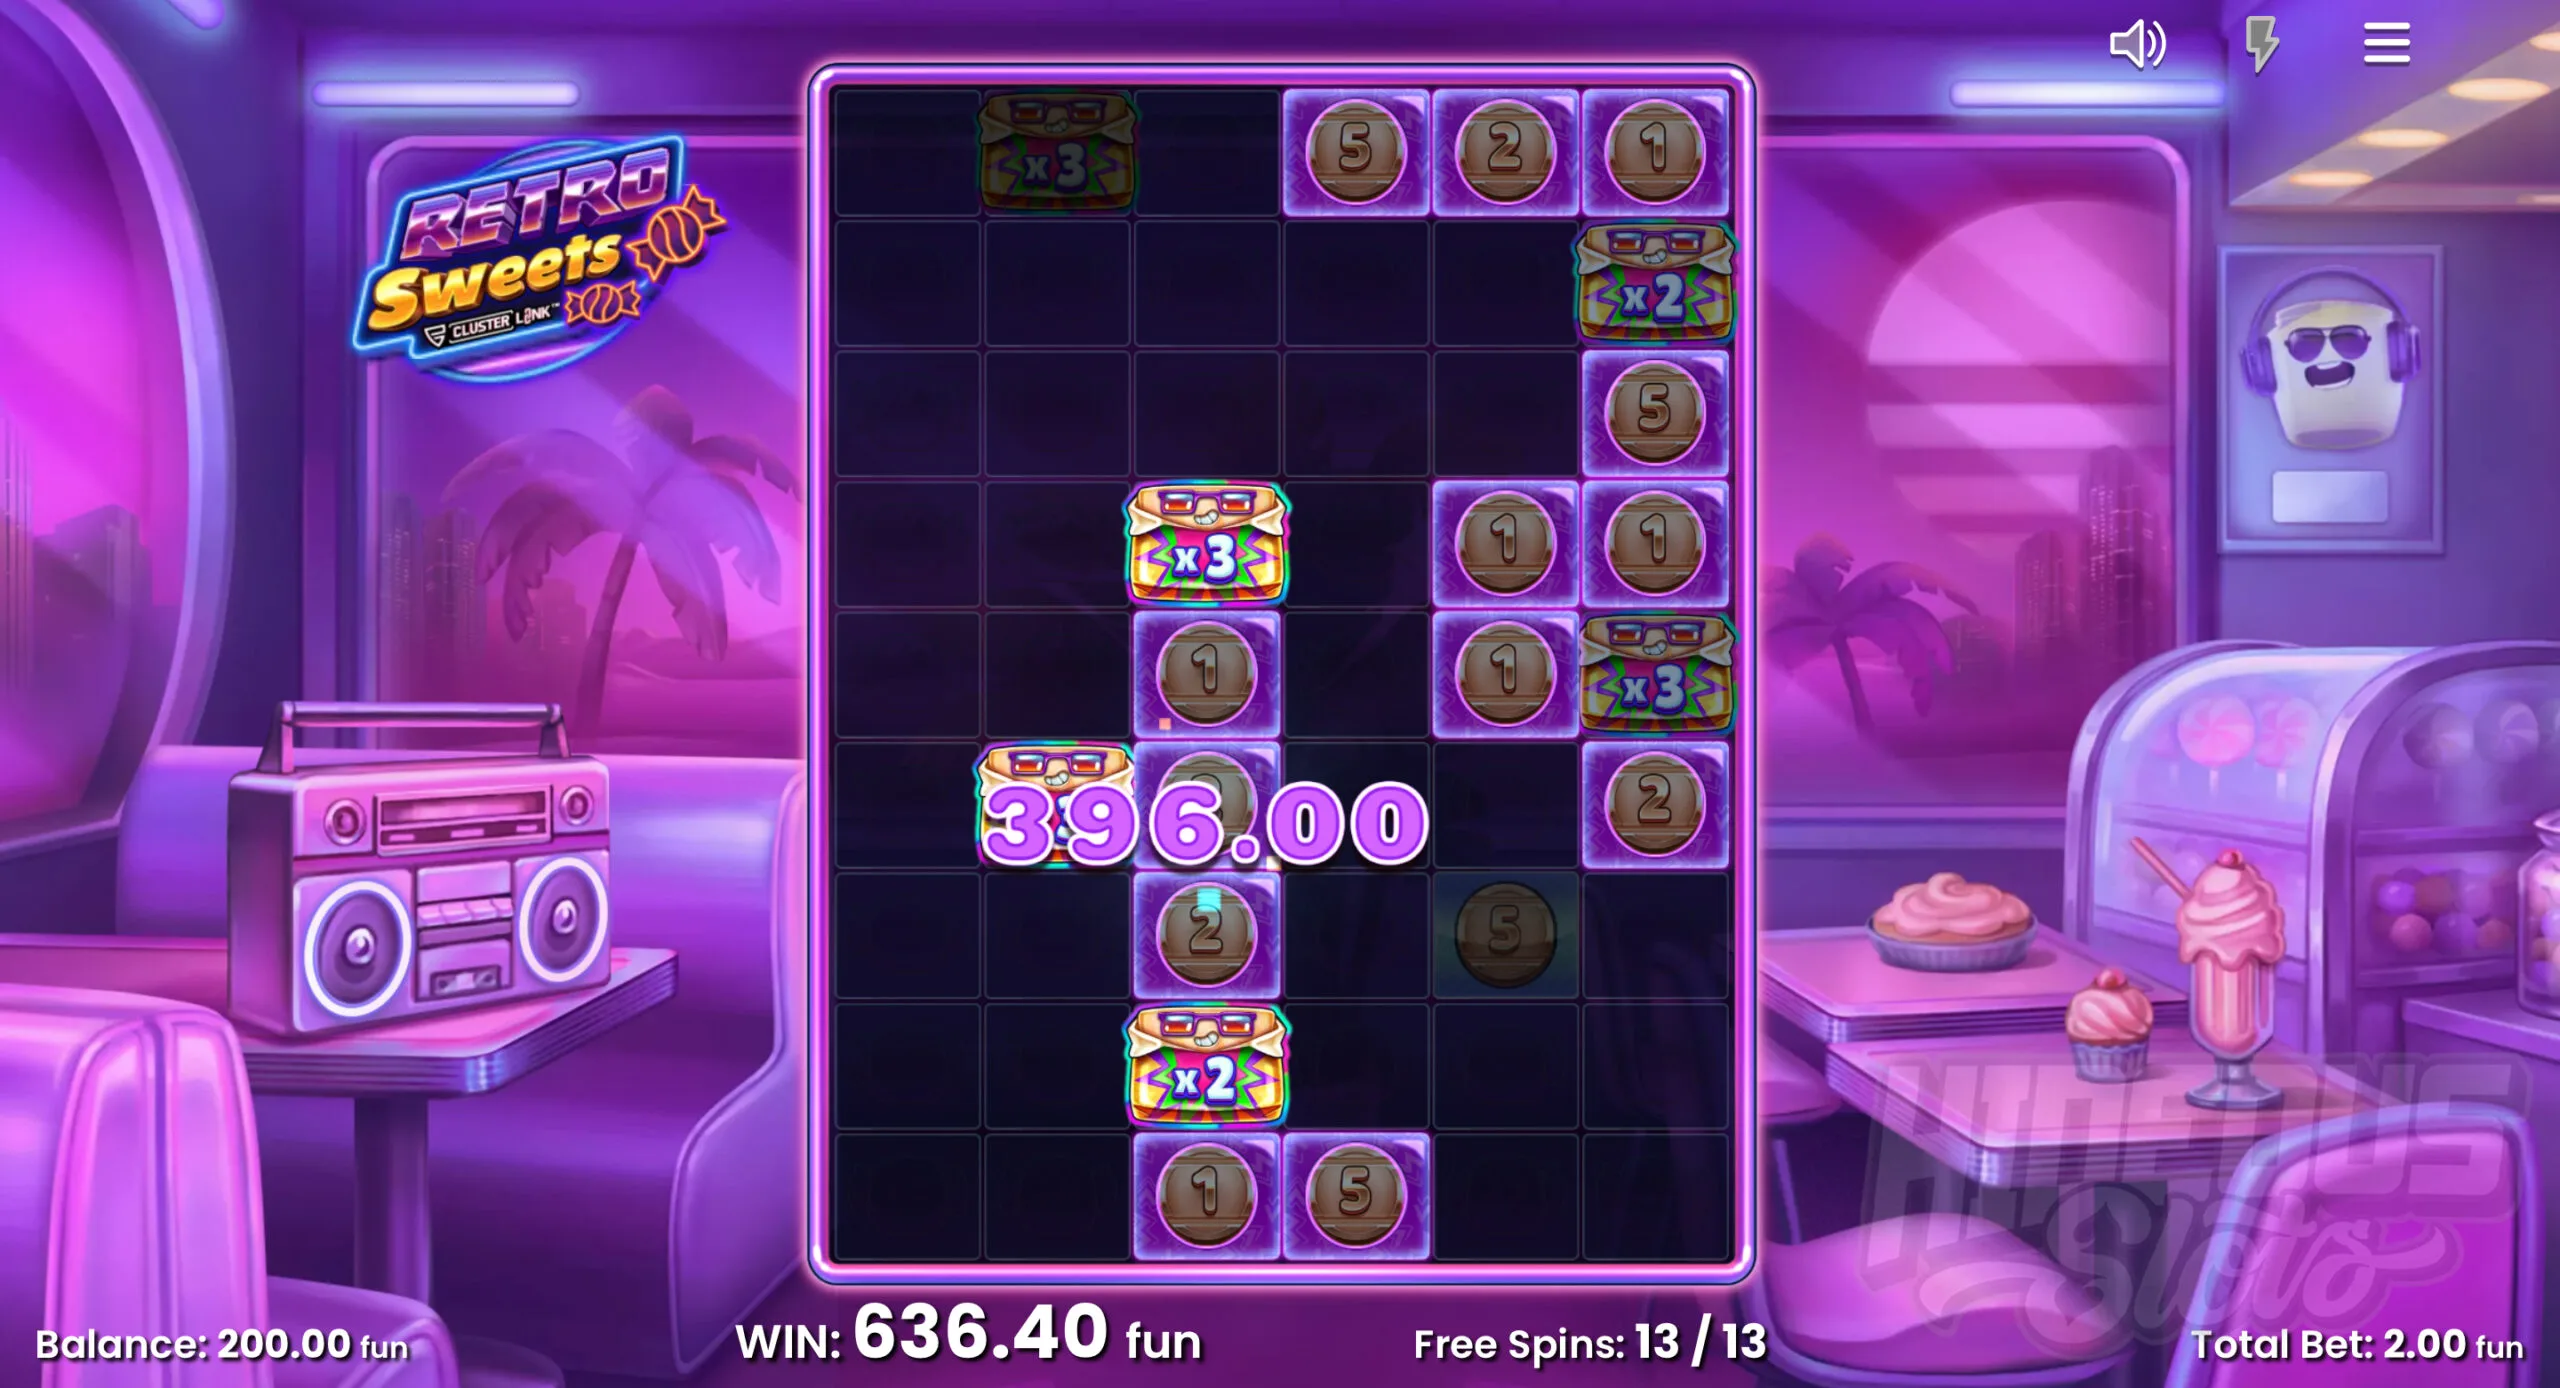 Retro Sweets Super Free Spins Feature